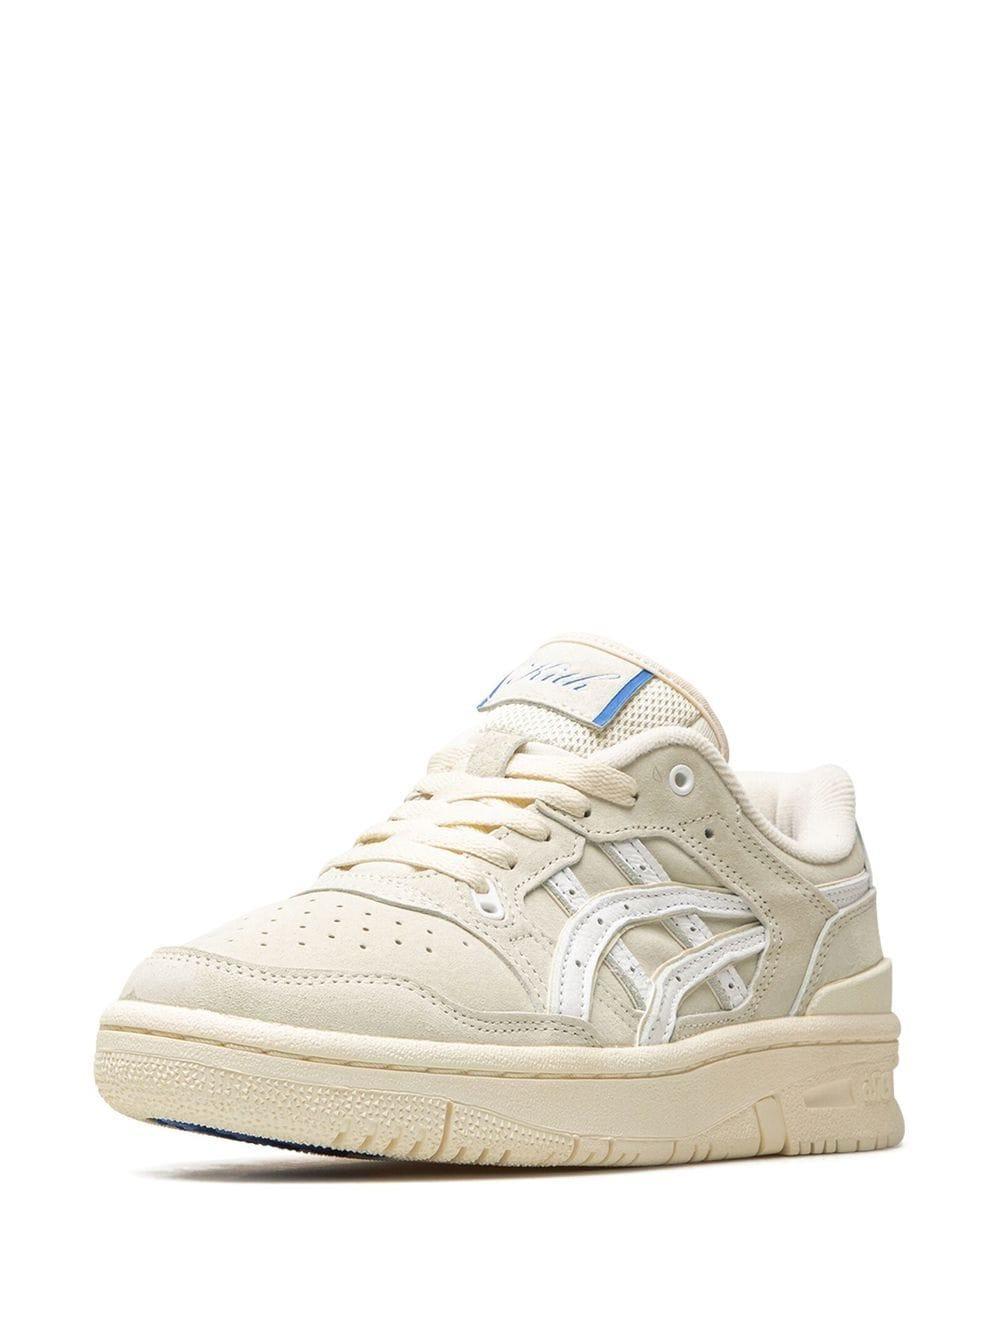 Asics Ex89 Low-top Sneakers in White for Men | Lyst